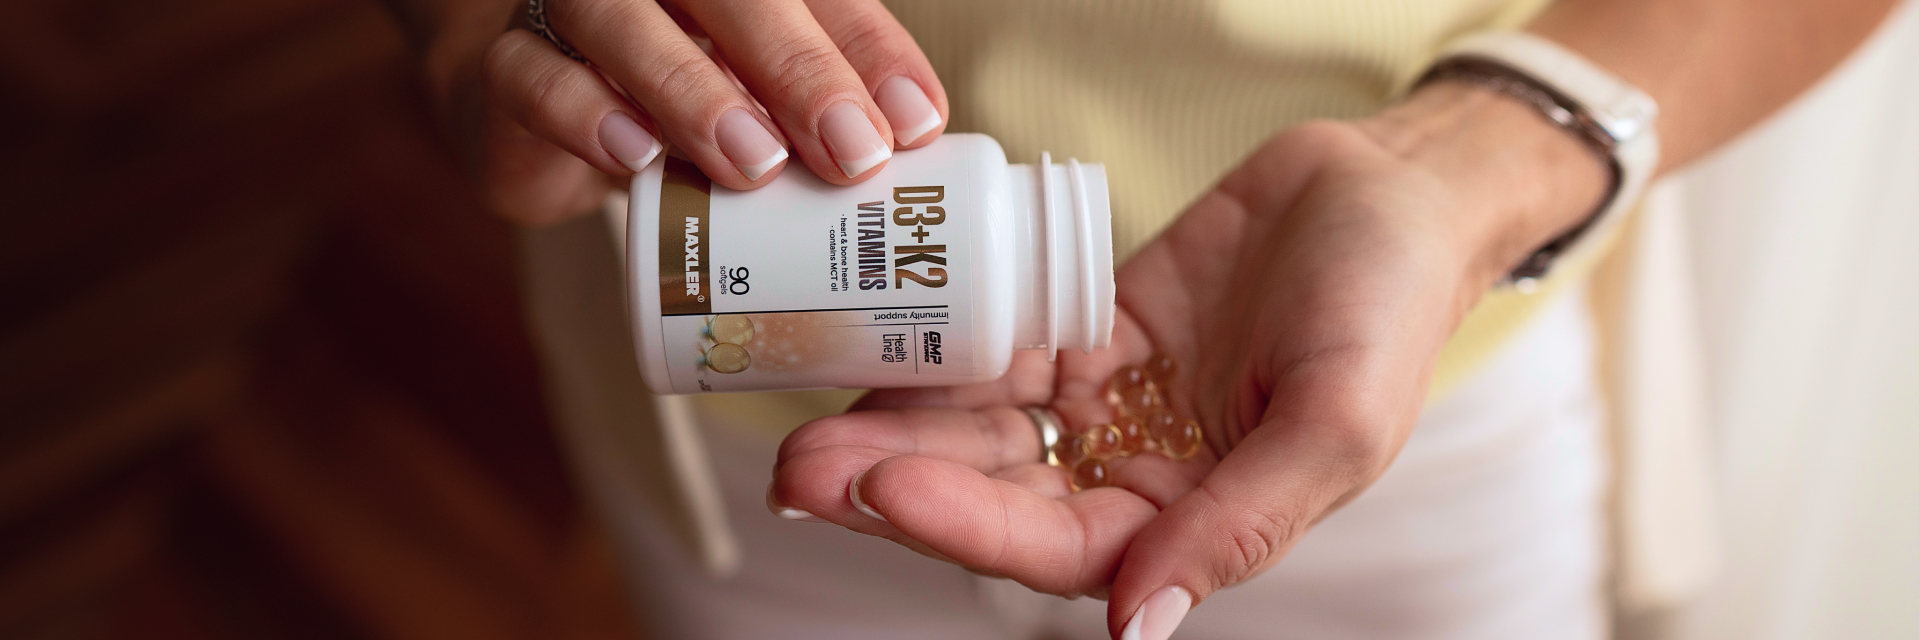 A woman pouring softgel capsules on her hand